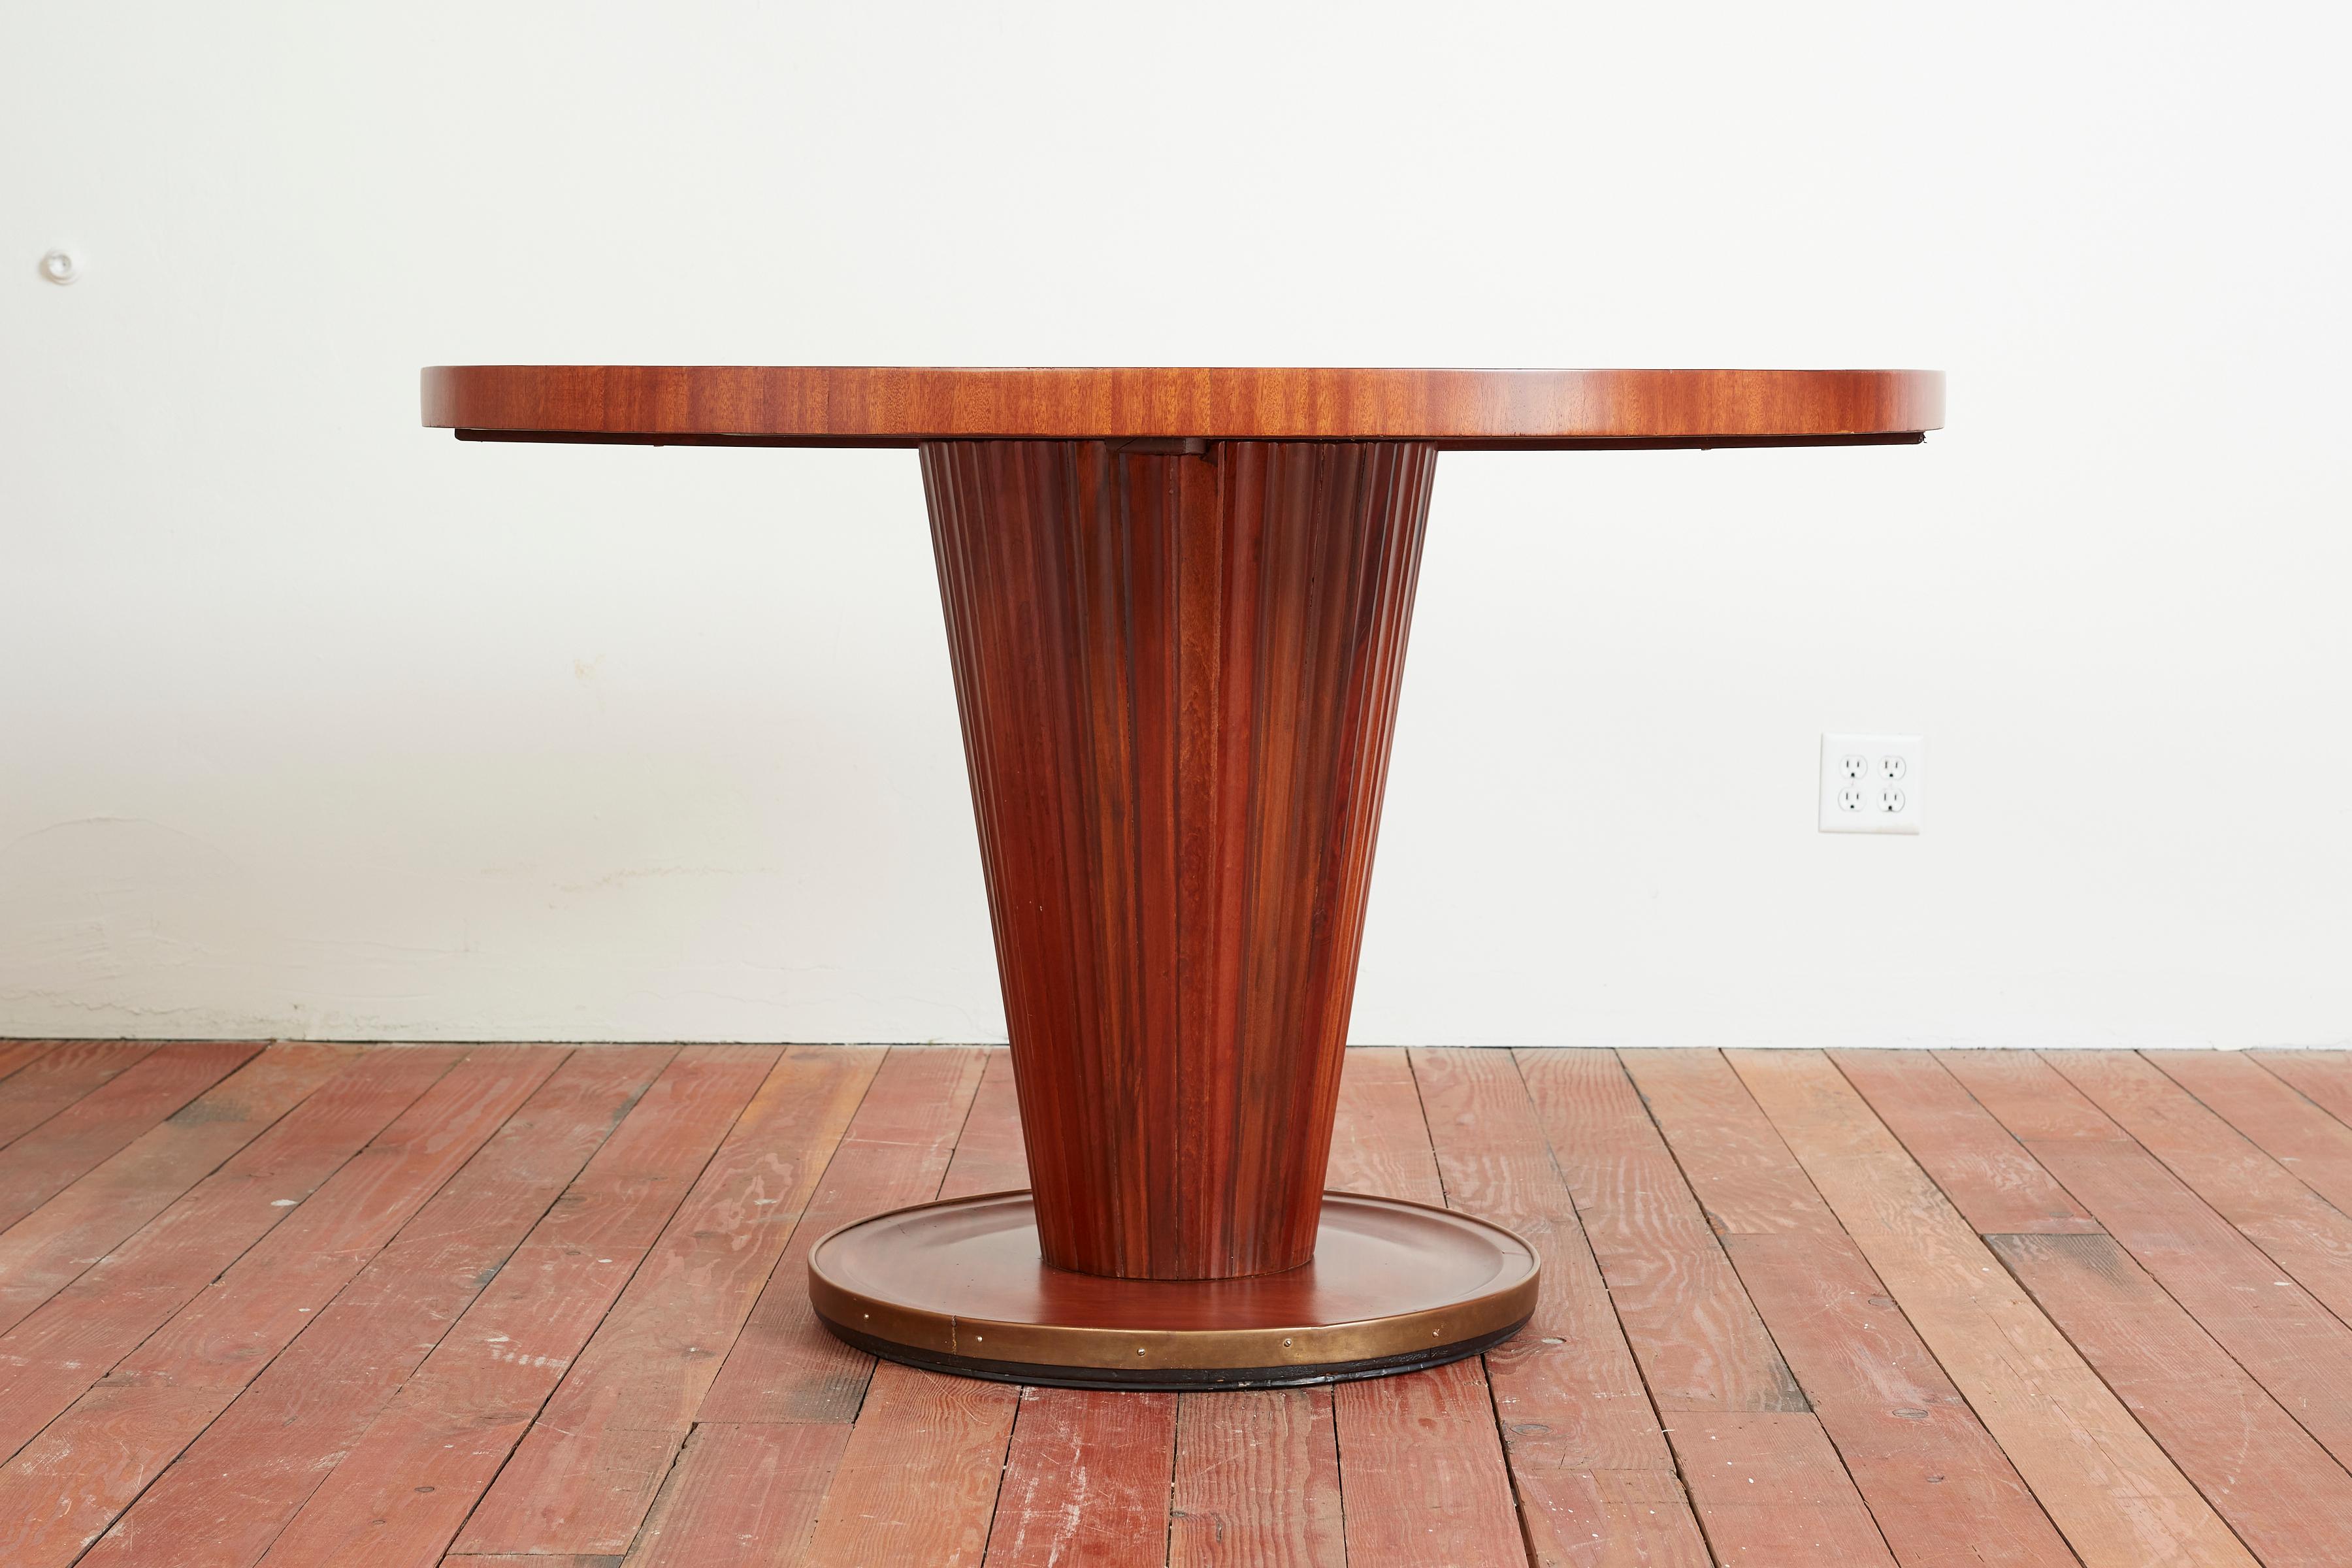 Important center table by Osvaldo Borsani - Italy, circa 1950s
Stunning inlayed walnut top with corrugated pedestal base with brass detail. 
Newly refinished and restored - 
Exquisite piece!